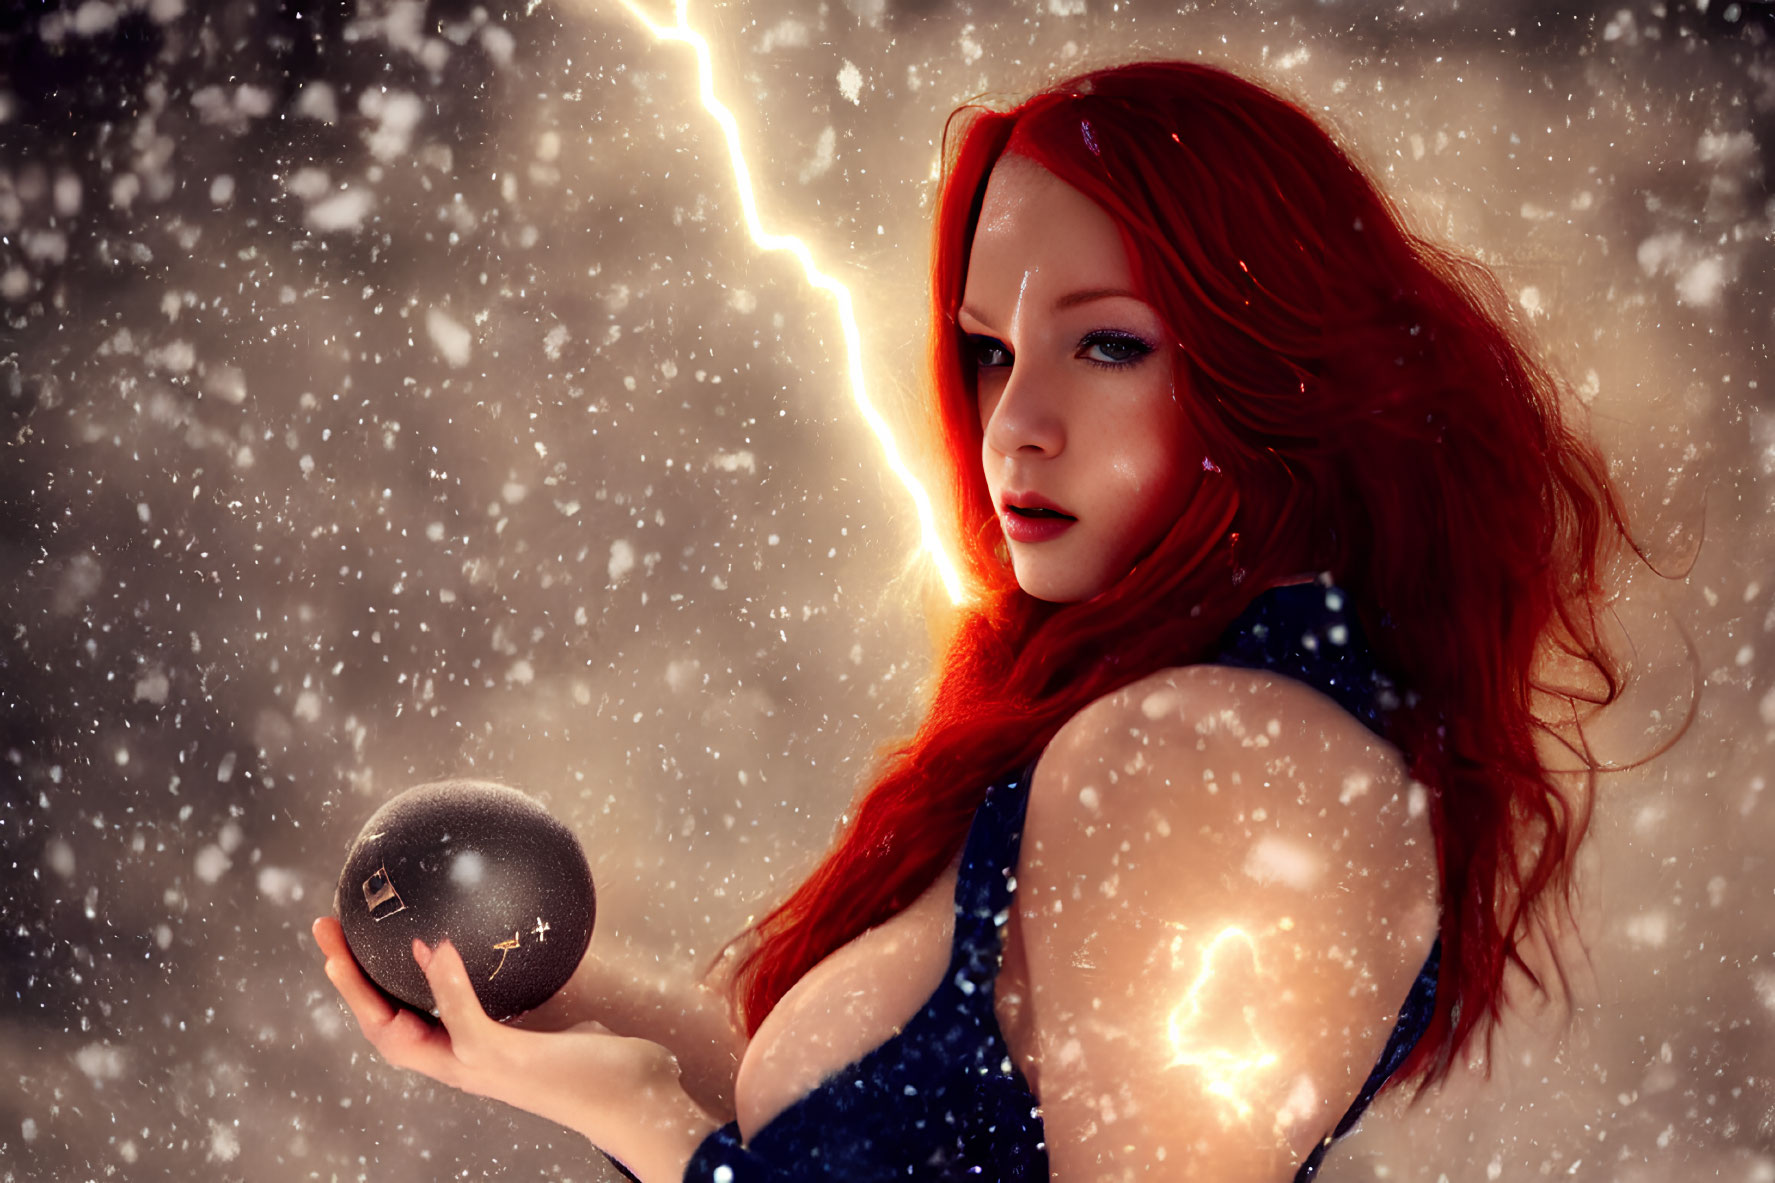 Red-haired woman with mystical orb in snowy landscape with lightning bolt